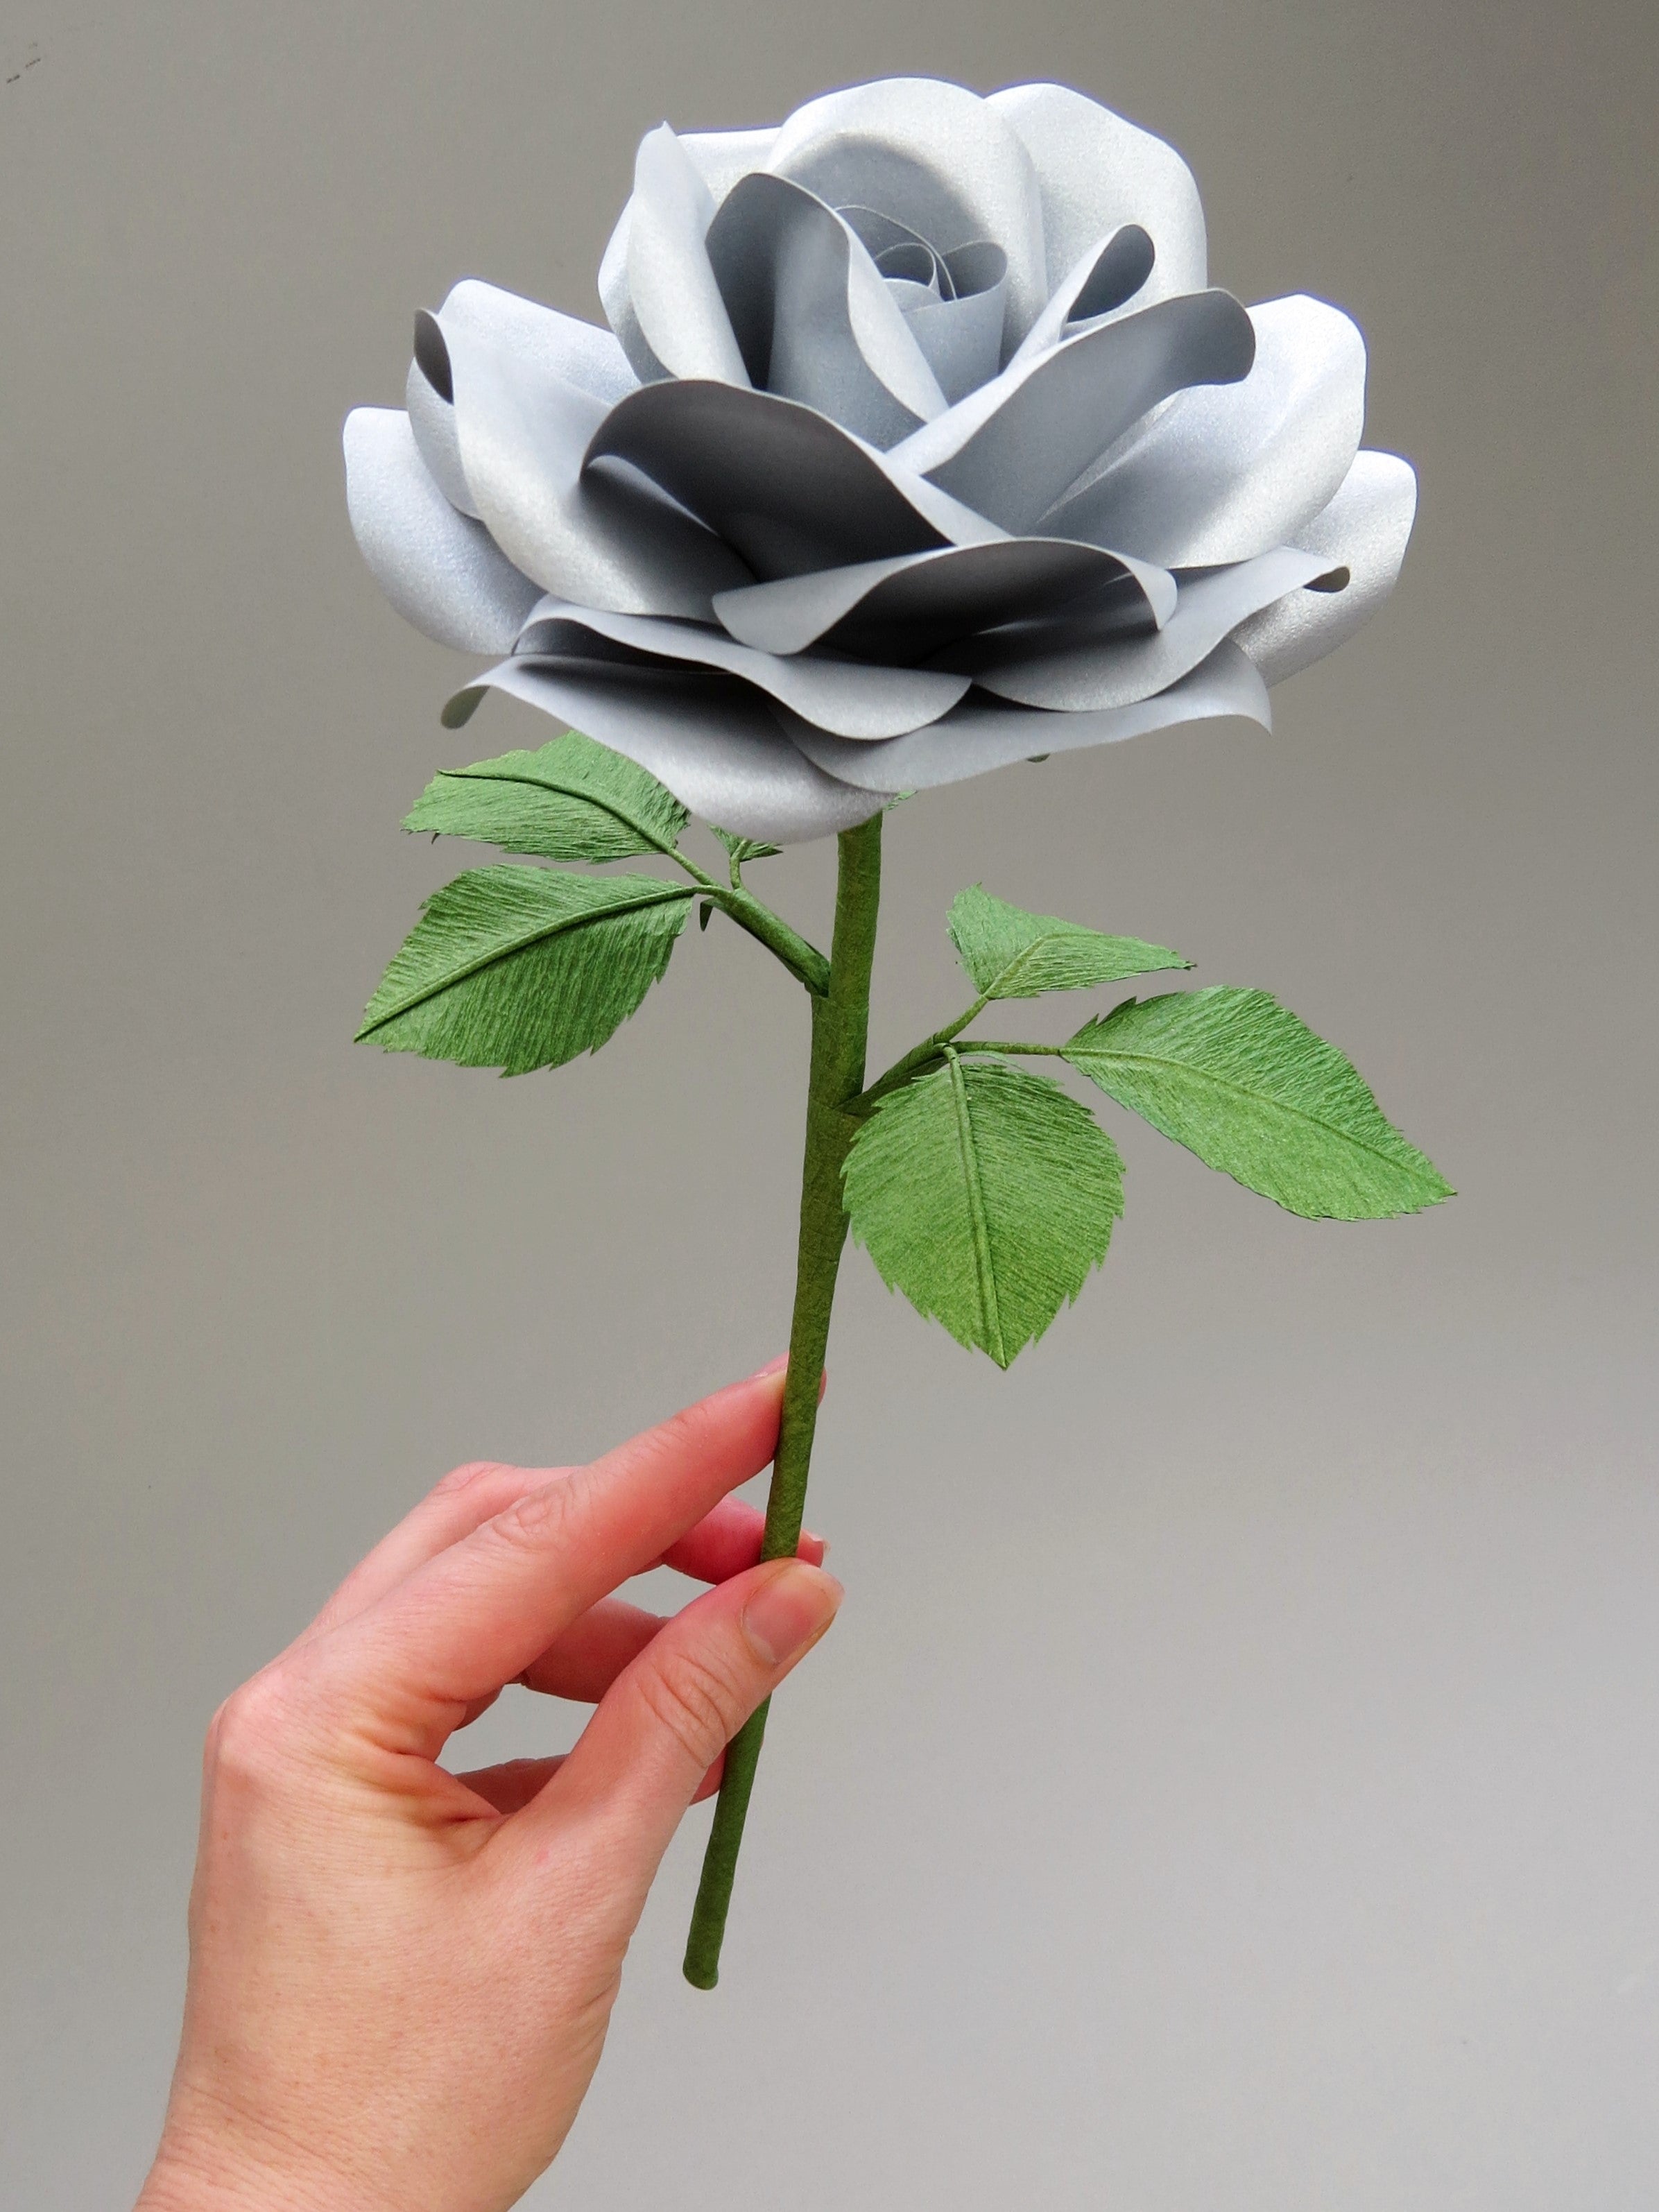 platinum wedding and engagement ring delicately placed on top of each other nearby Pale white hand delicately holding the stem of a steel paper rose with six ivy green leaves